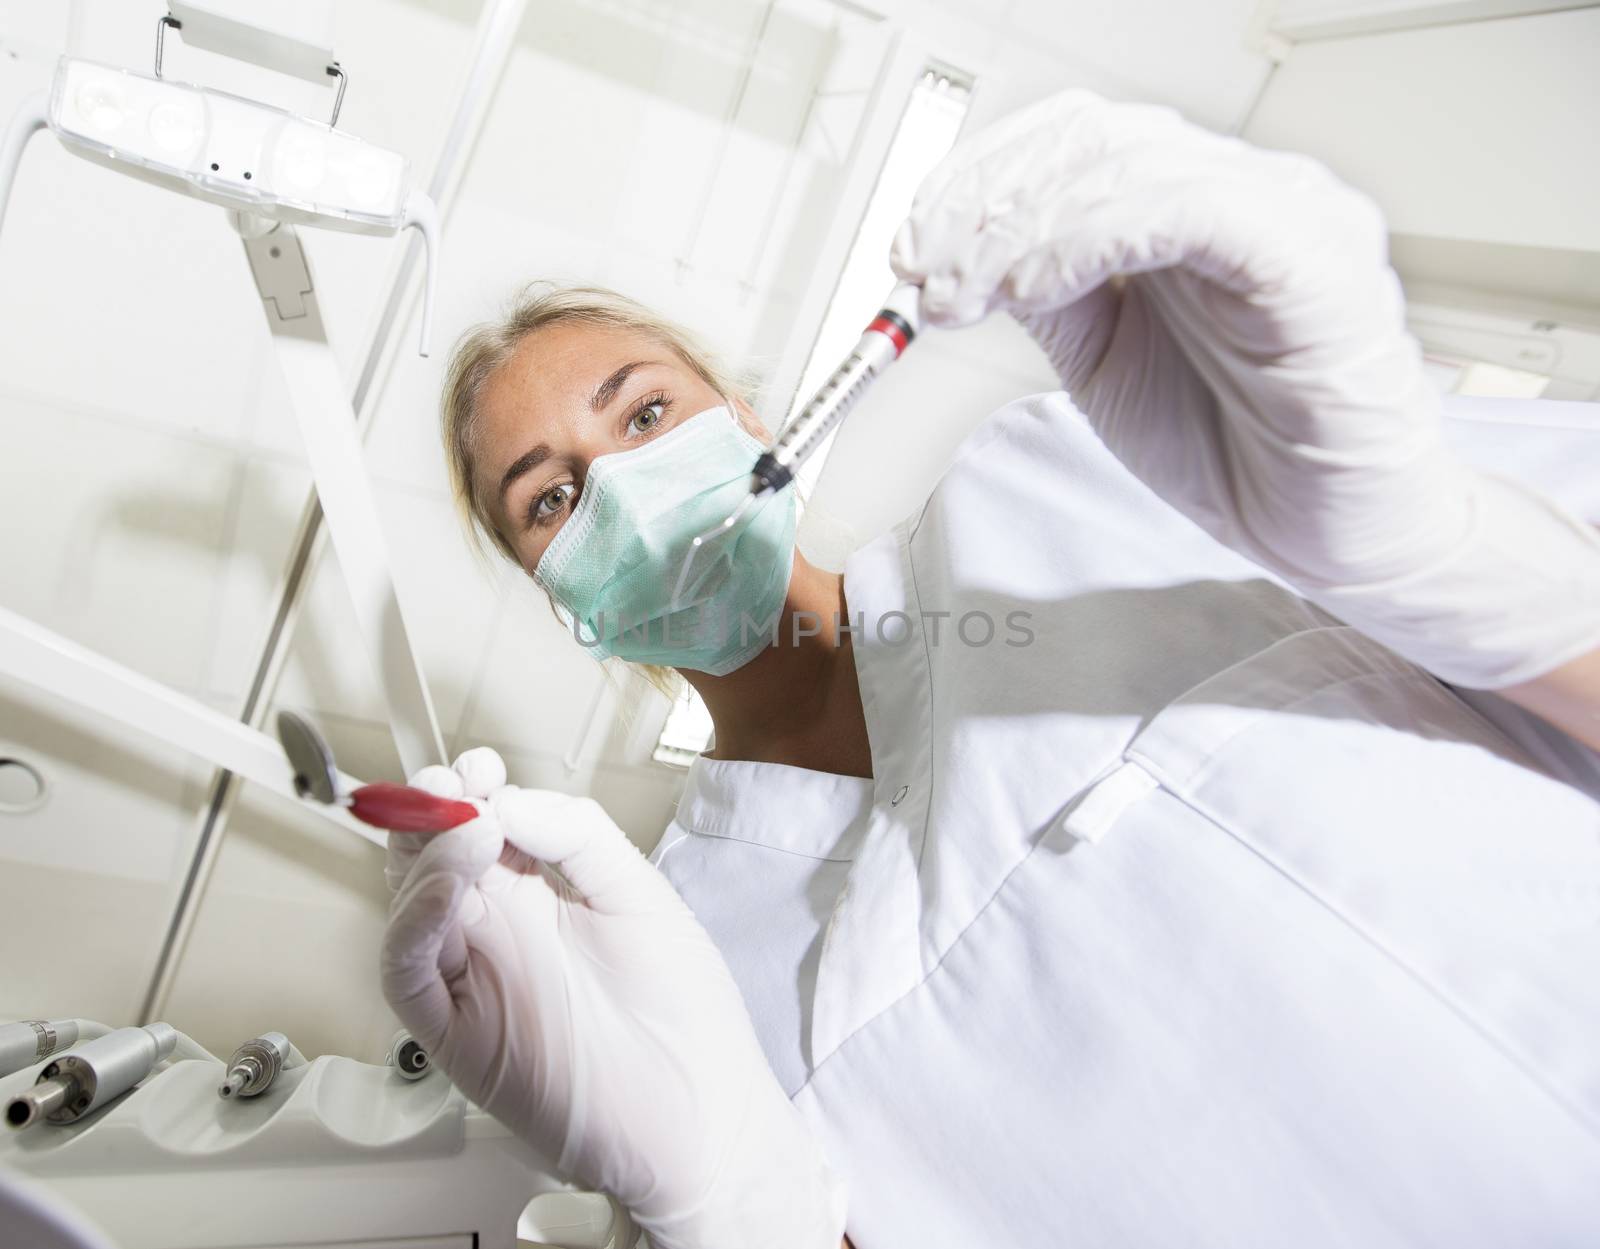 Dentist in action from low angle view